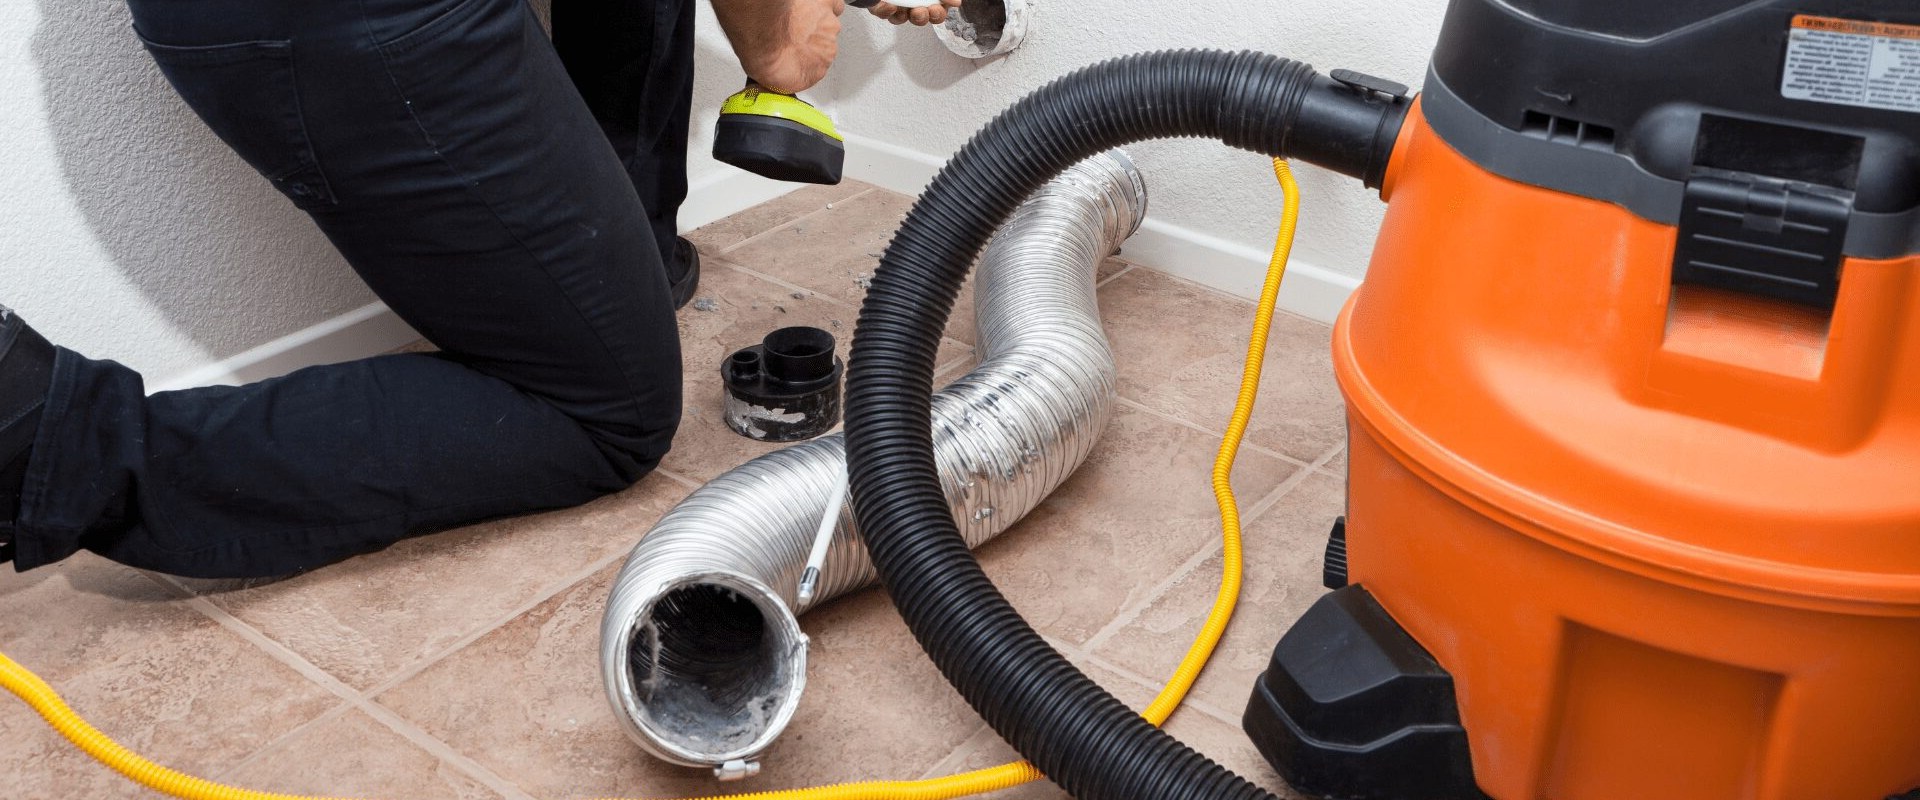 Dryer Vent Cleaning Services: What You Need to Know